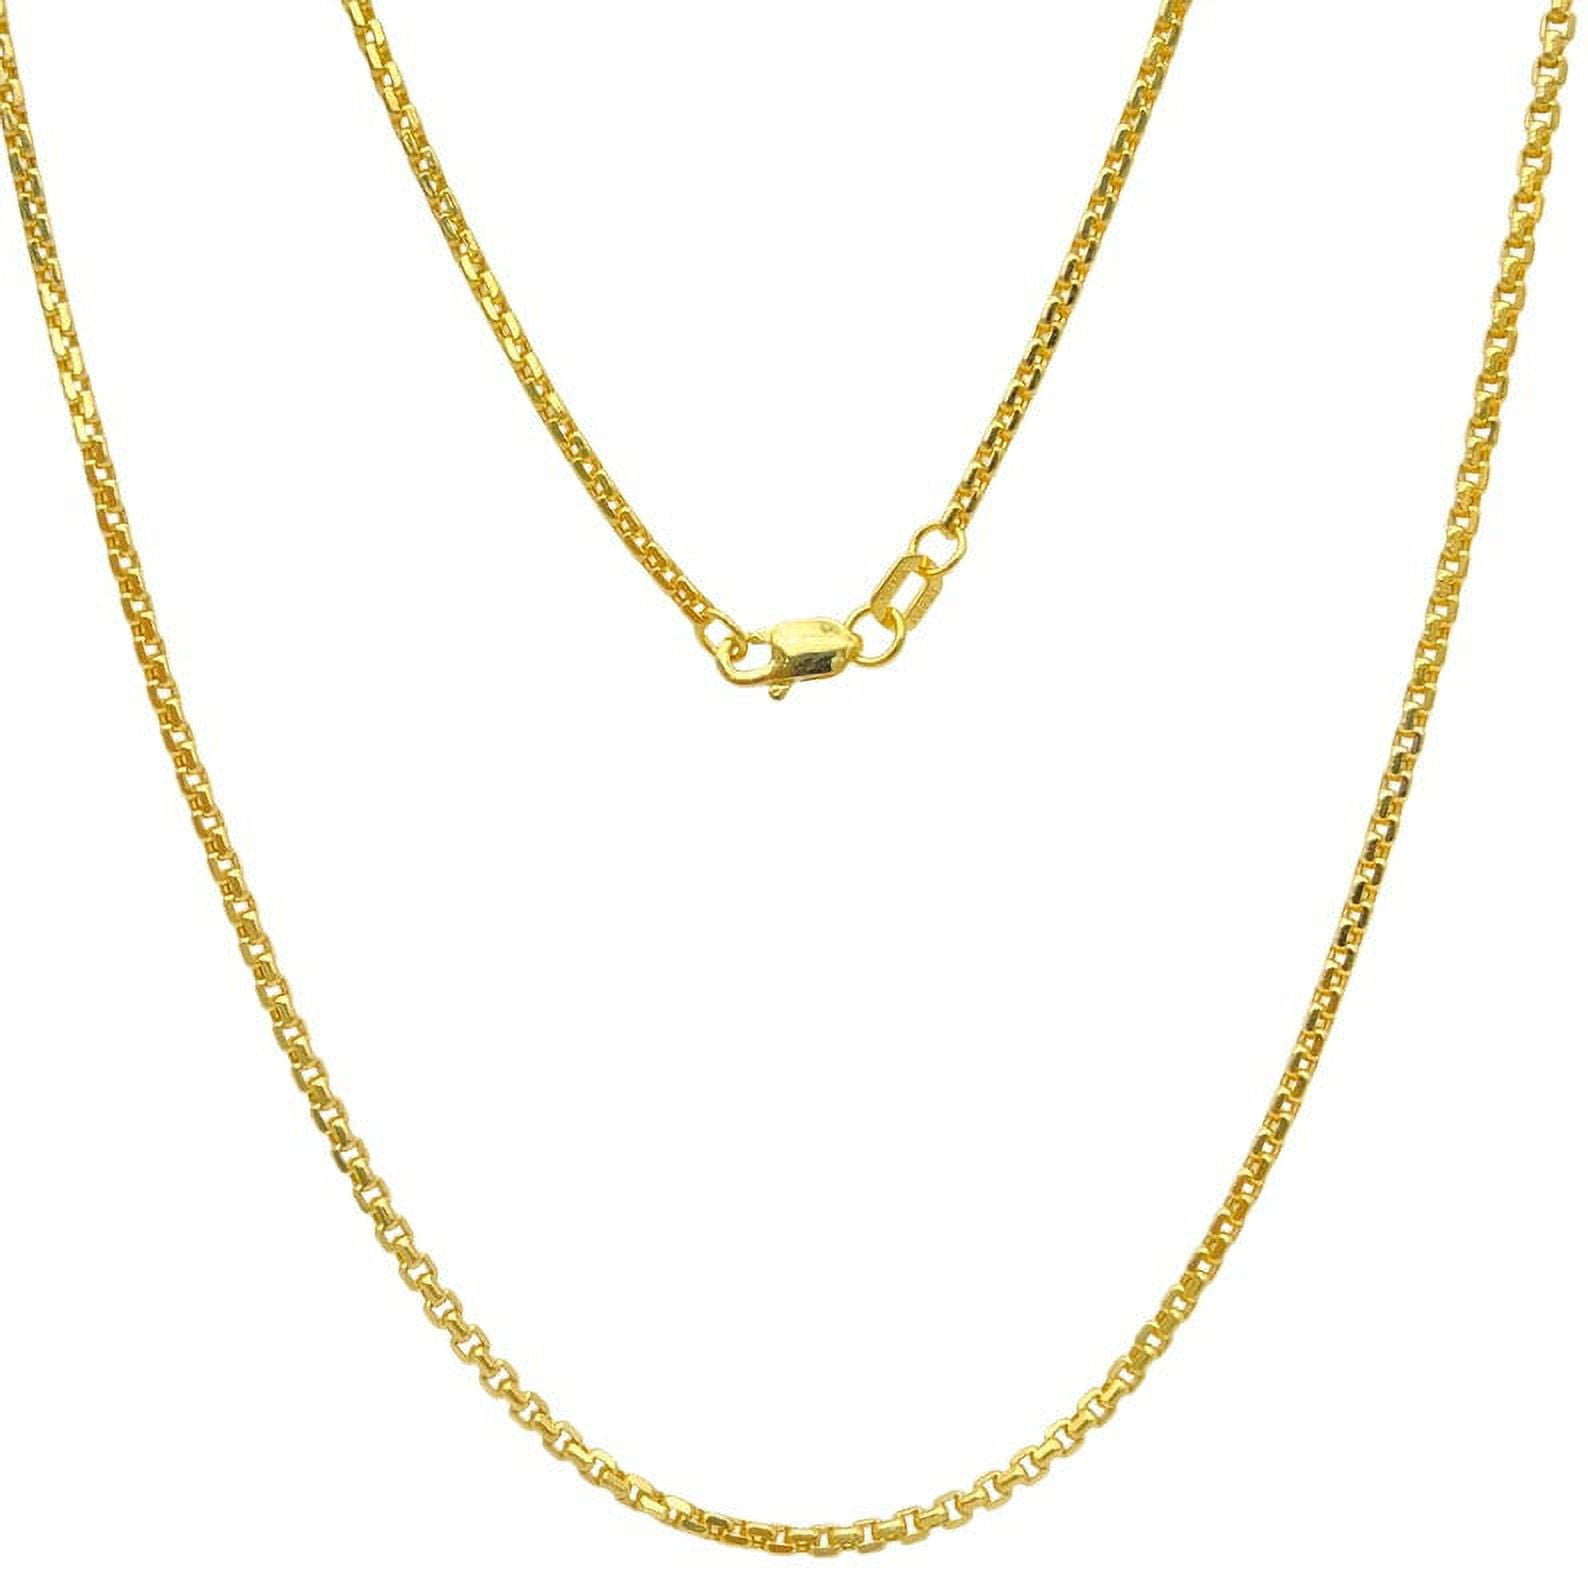 4mm Gold Round Box Link Stainless Steel Necklace Chain for Men or Women  Unisex Round Box Chain - Etsy